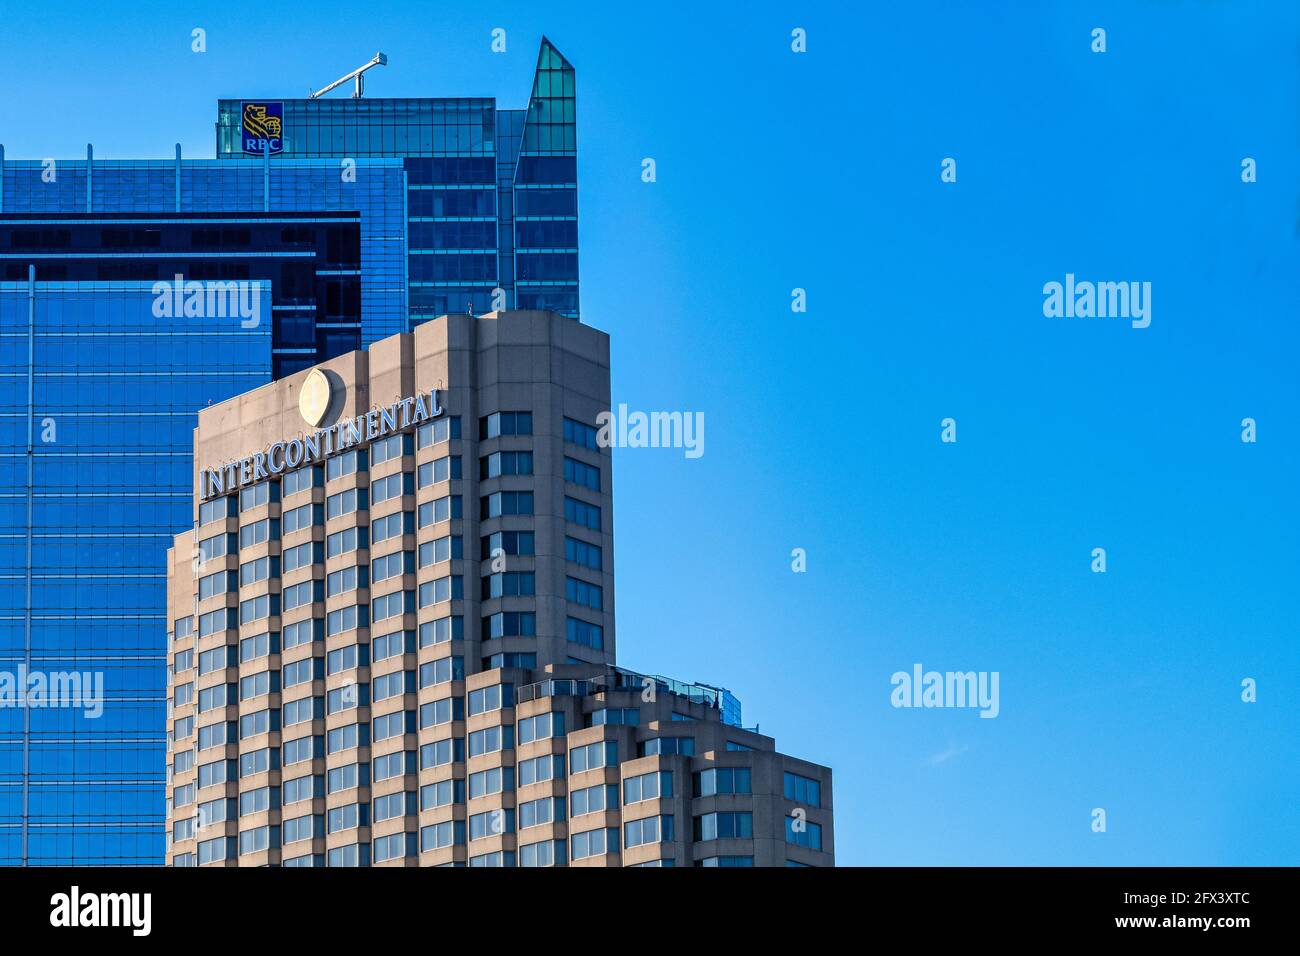 Unusual angle of the Intercontinental Hotel and the Royal Bank Tower in the downtown district of Toronto, Canada Stock Photo